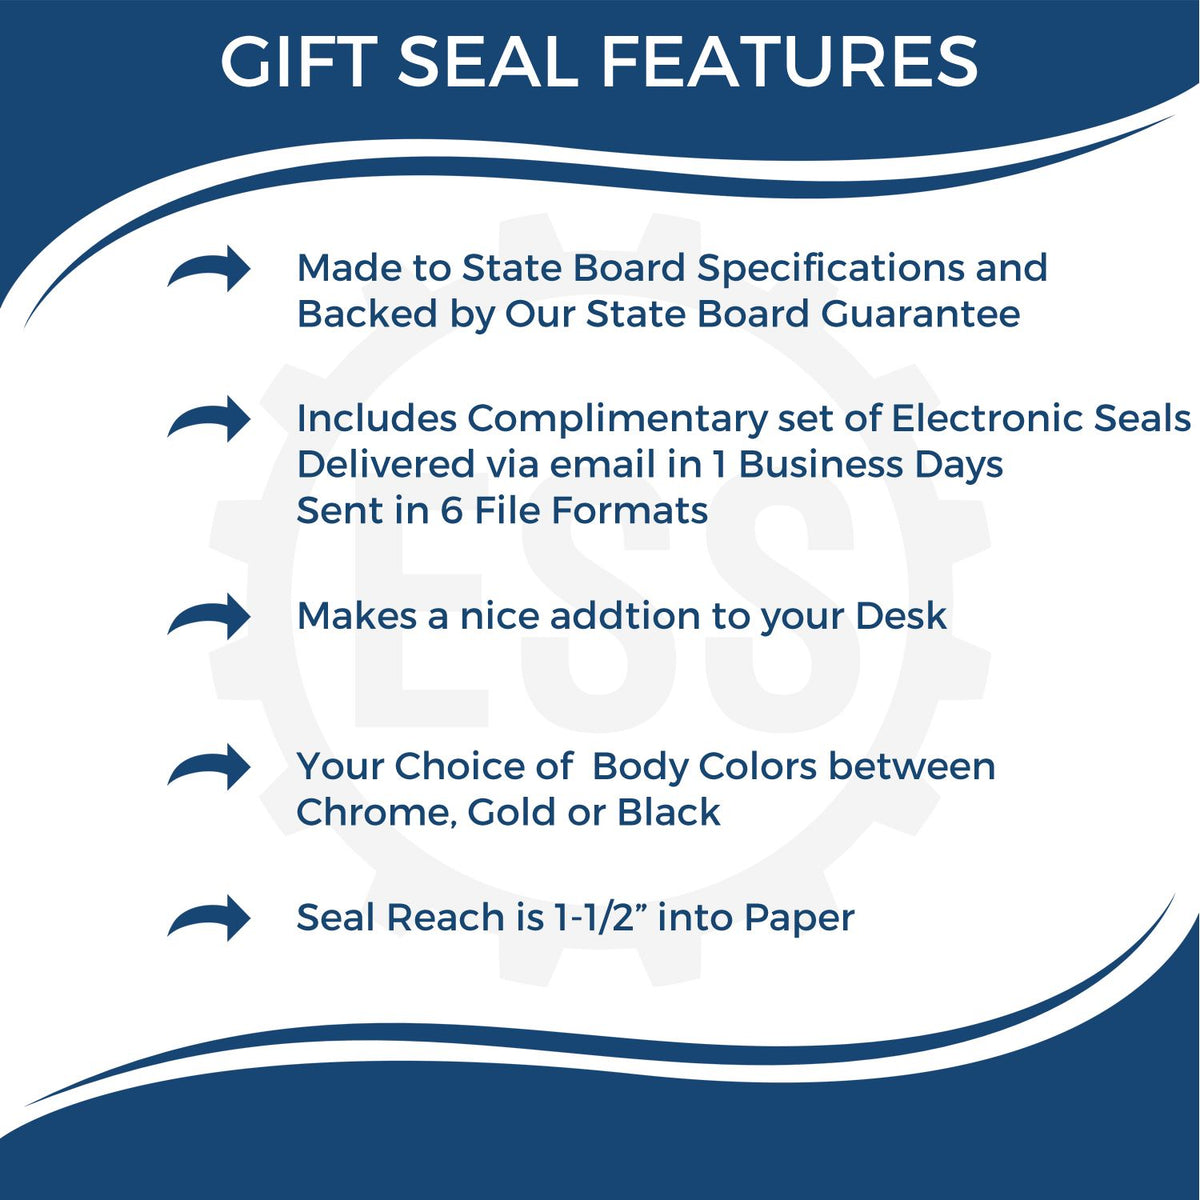 A picture of an infographic highlighting the selling points for the Gift Ohio Engineer Seal